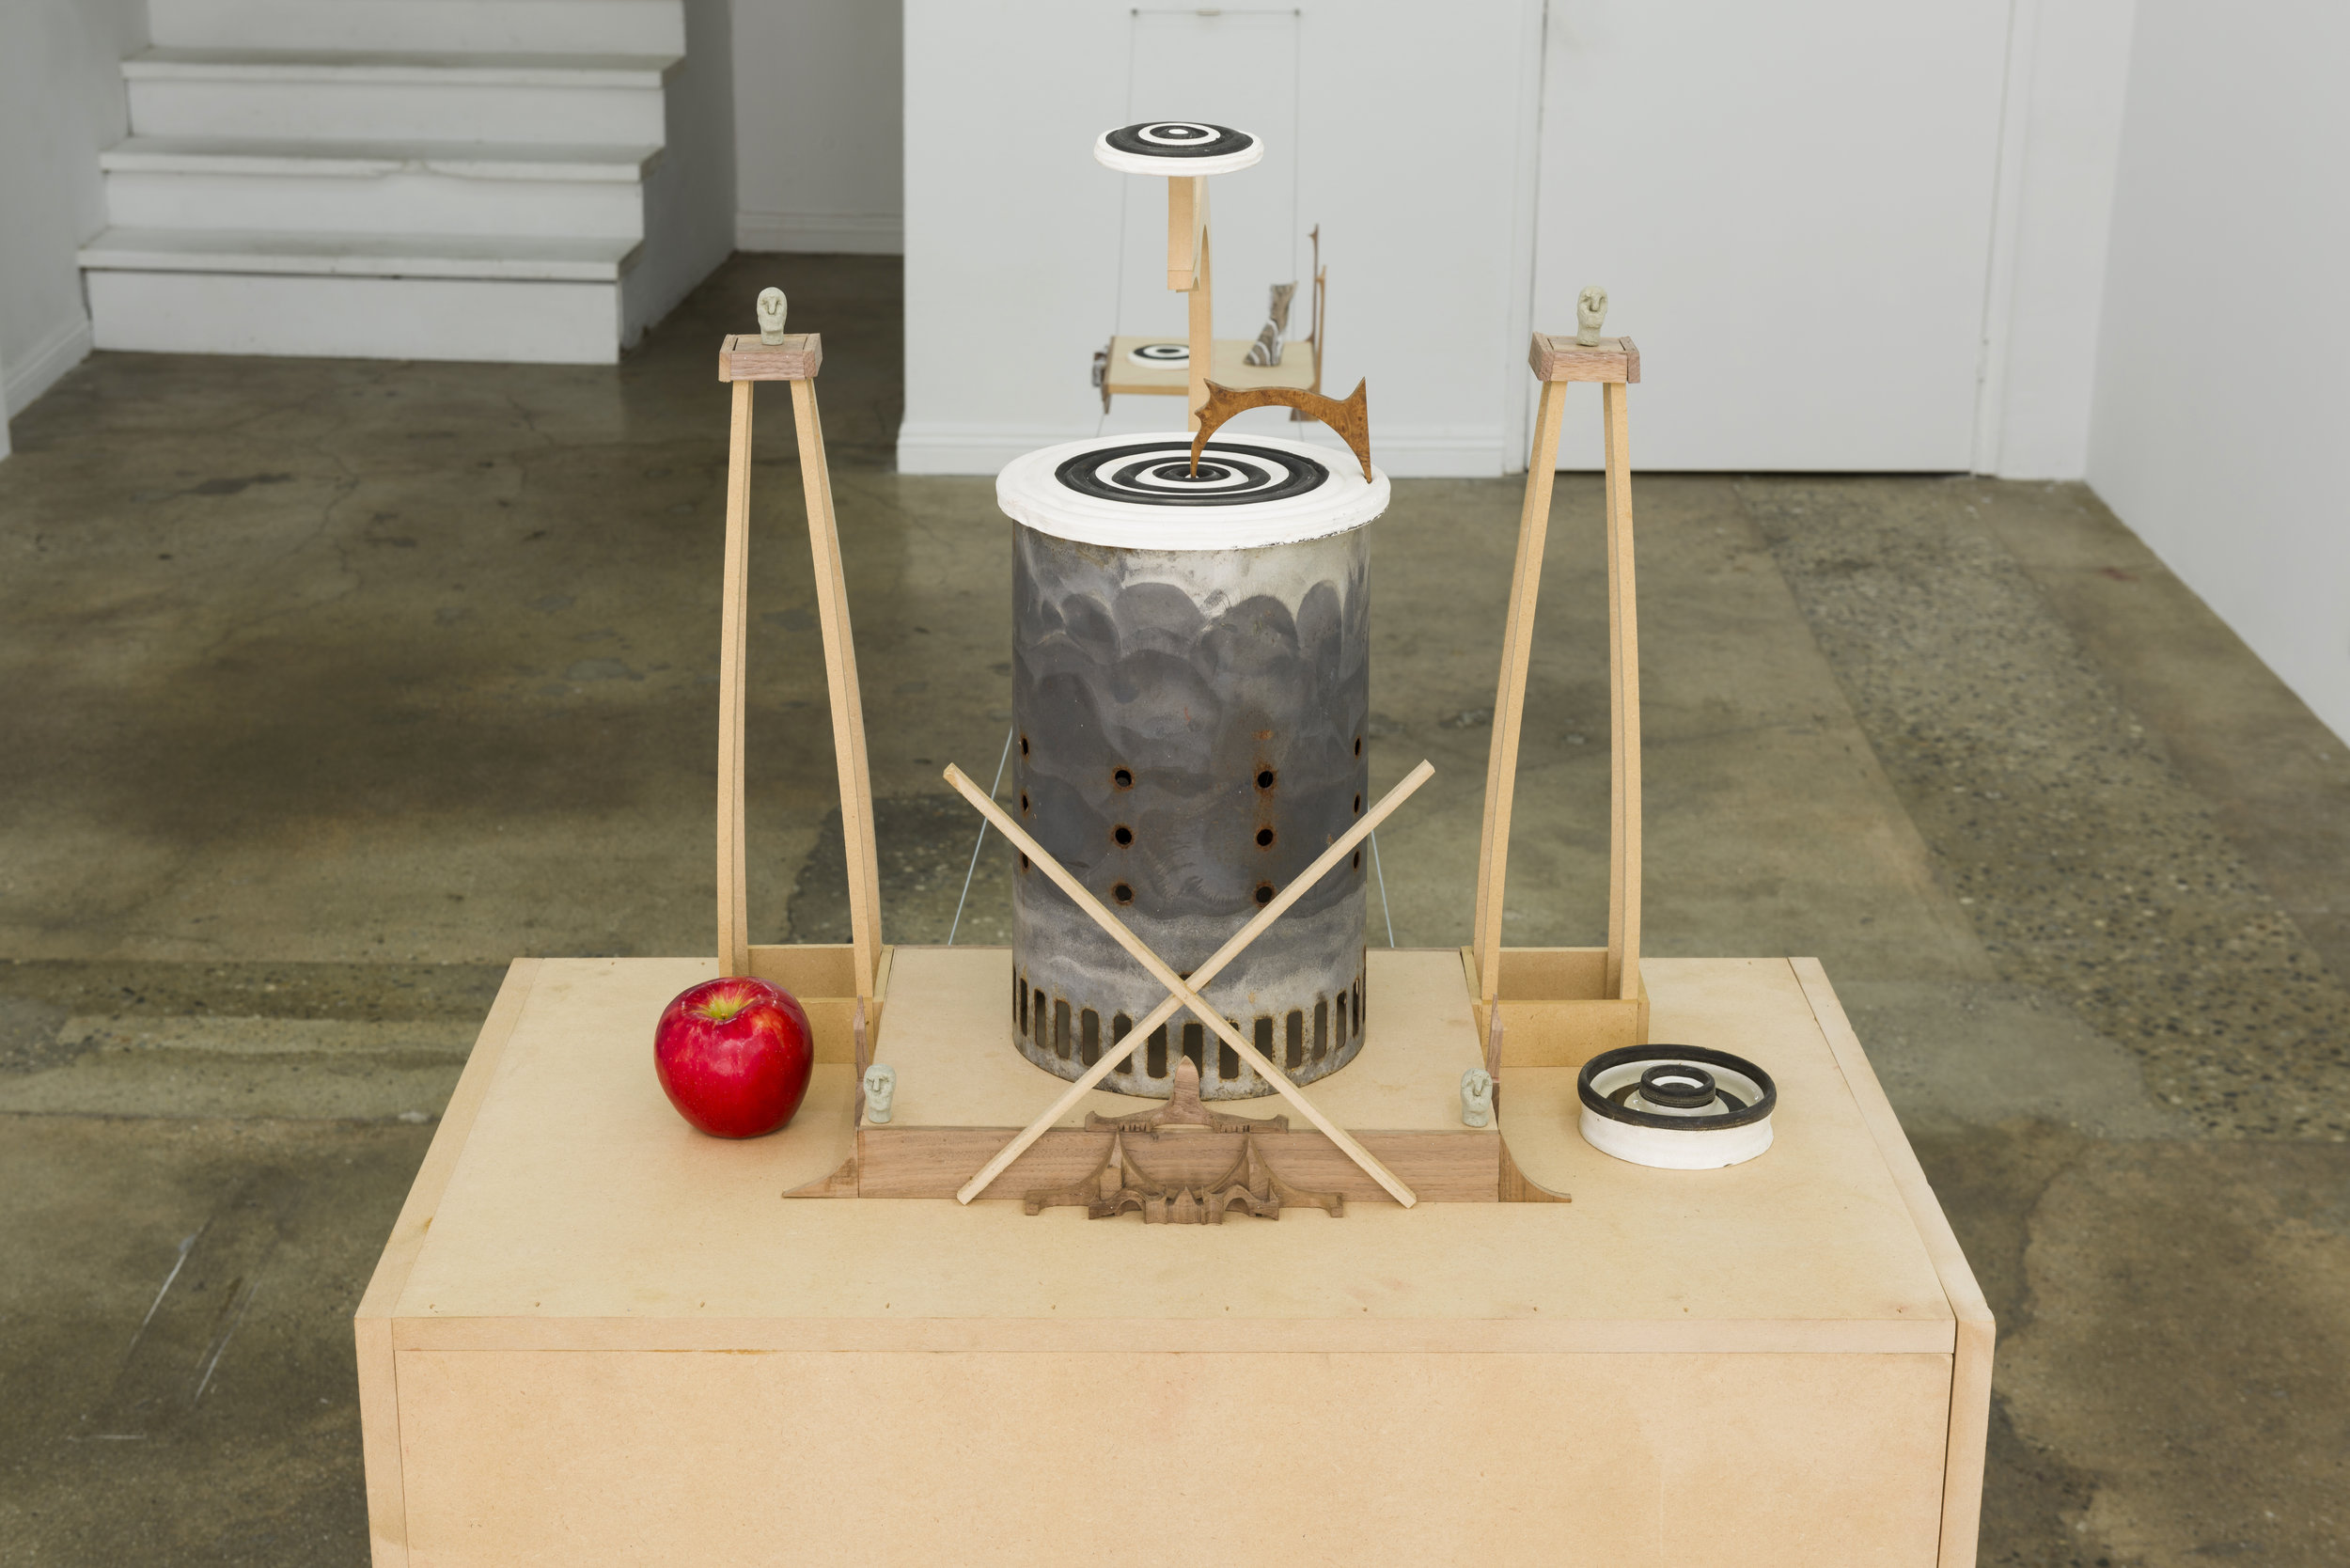   Harry Gould Harvey IV  Altar to the Hedonist of Eden   2019 MDF, walnut, burl, clay, metal, apple, bong water 21 x 23 x 11.5 in     